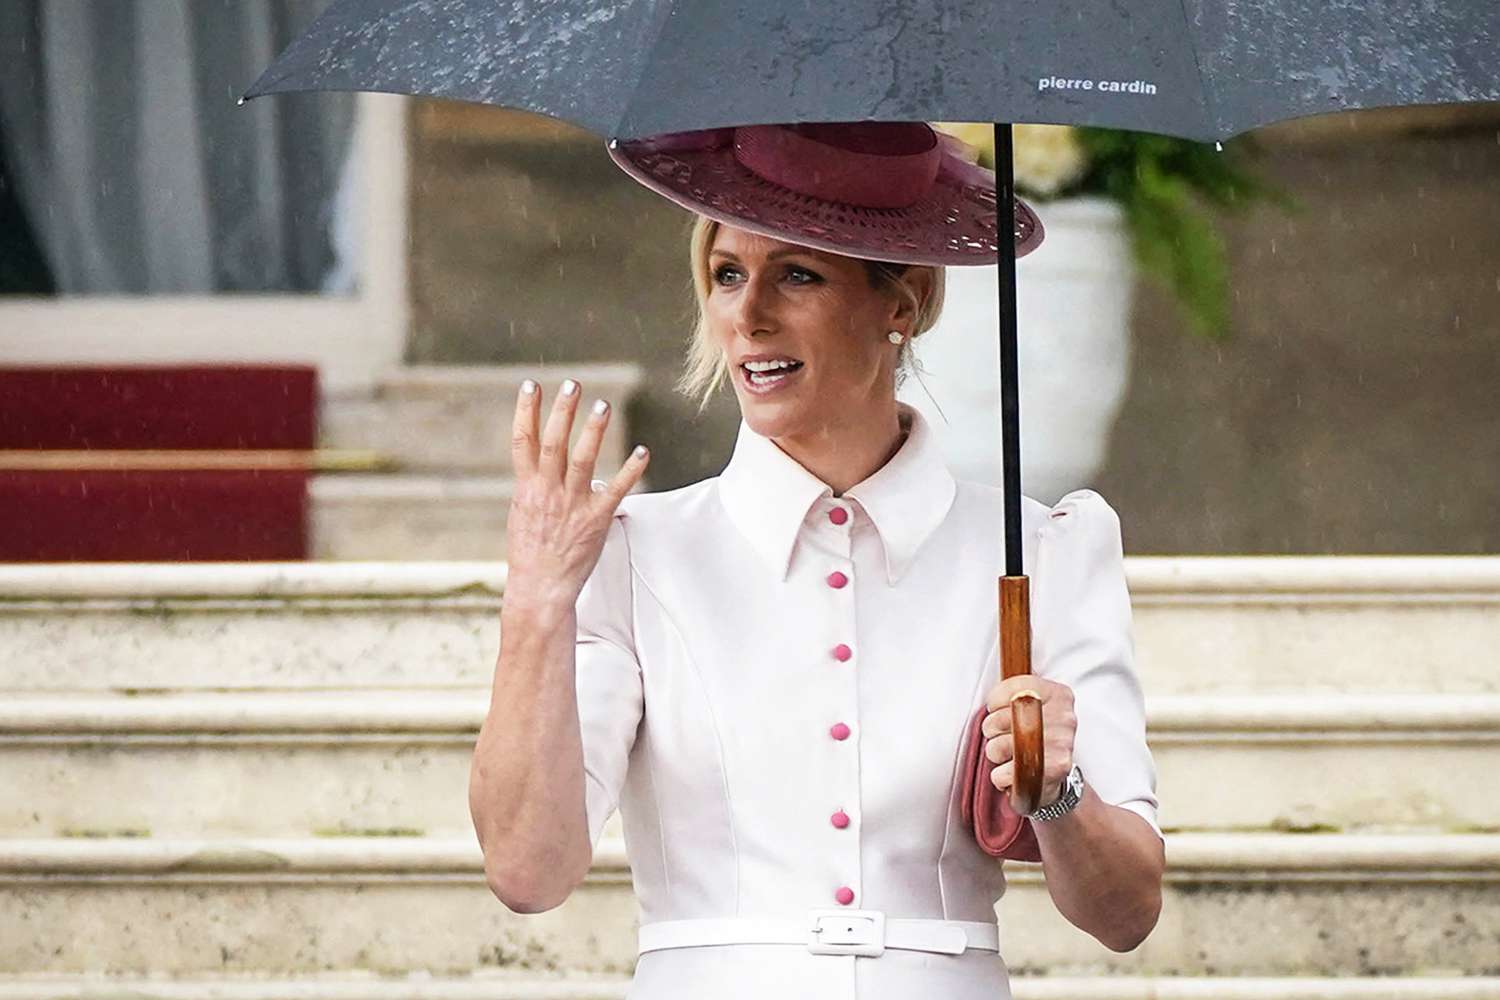 Zara Tindall Came to Garden Party Prepared for Rain with a Surprise Accessory (Hint: It's Not Her Umbrella!)